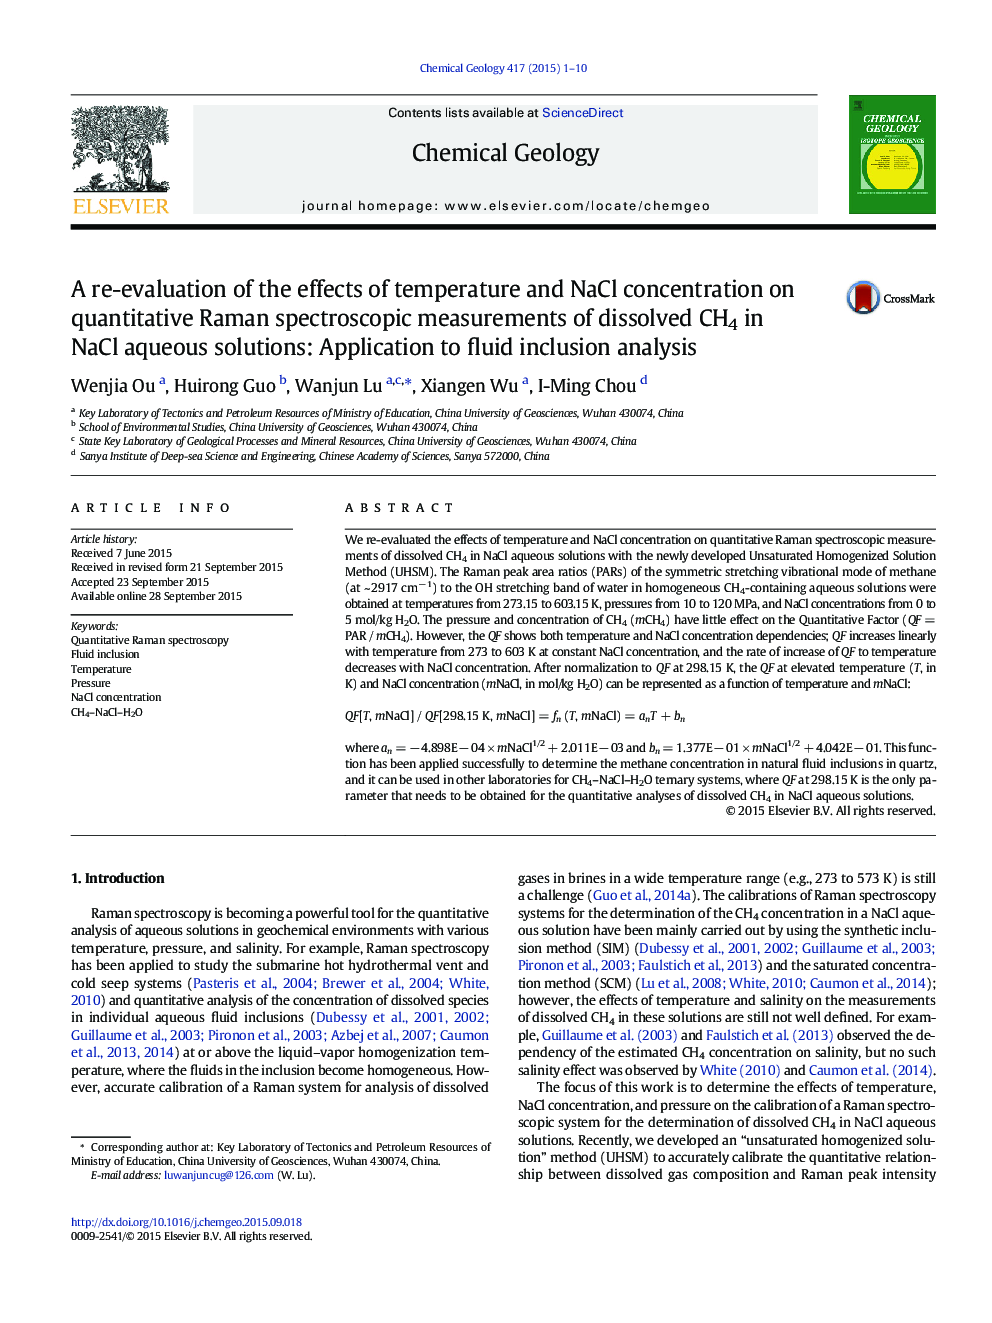 A re-evaluation of the effects of temperature and NaCl concentration on quantitative Raman spectroscopic measurements of dissolved CH4 in NaCl aqueous solutions: Application to fluid inclusion analysis